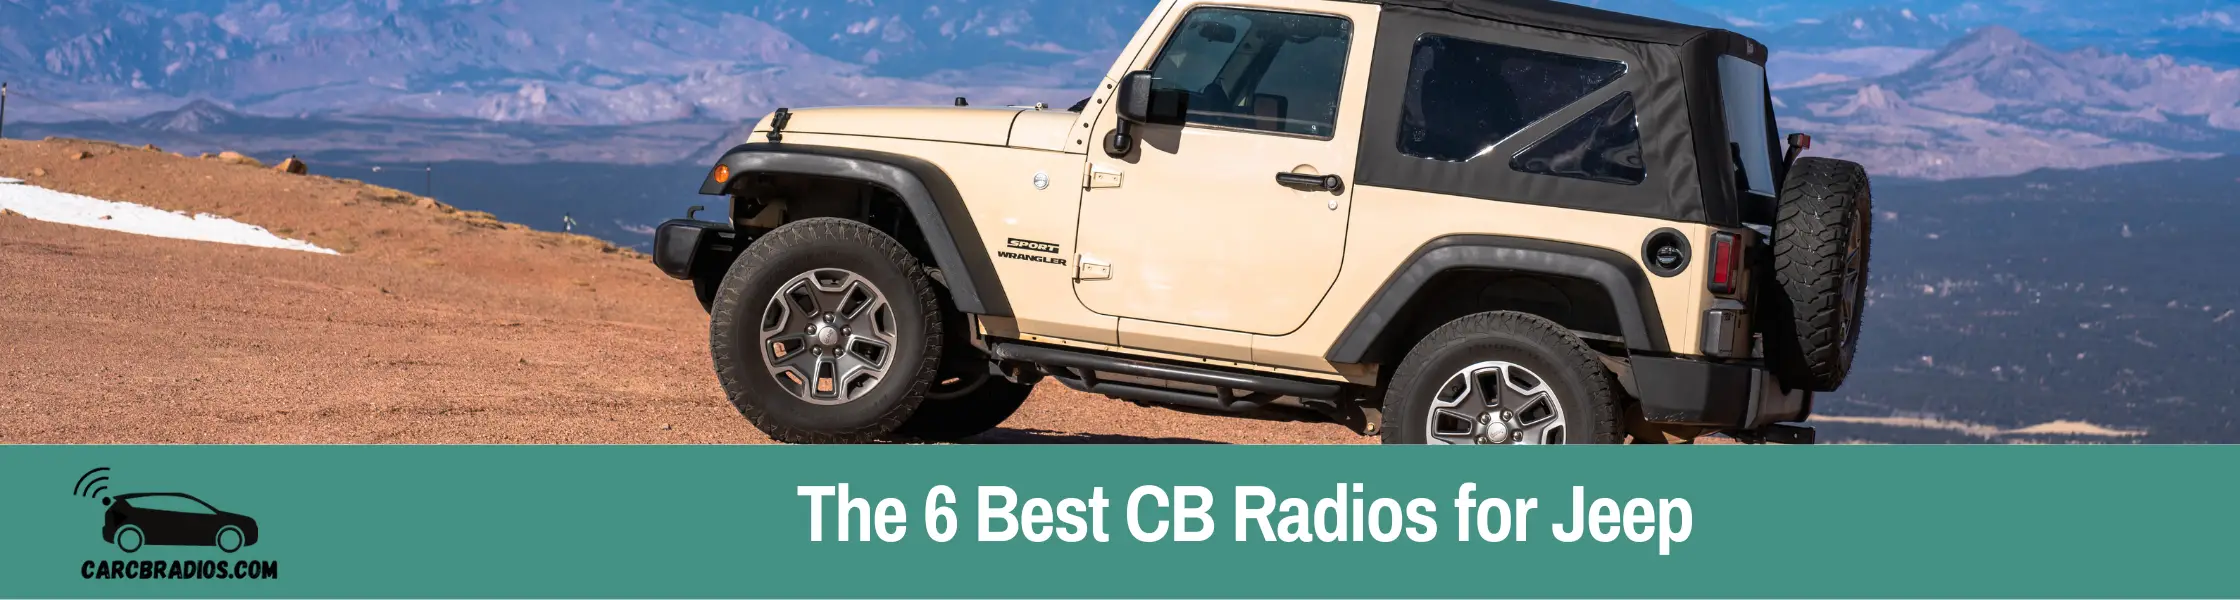 6 Best CB Radios for Jeep (& 4×4 Off-Road) Drivers